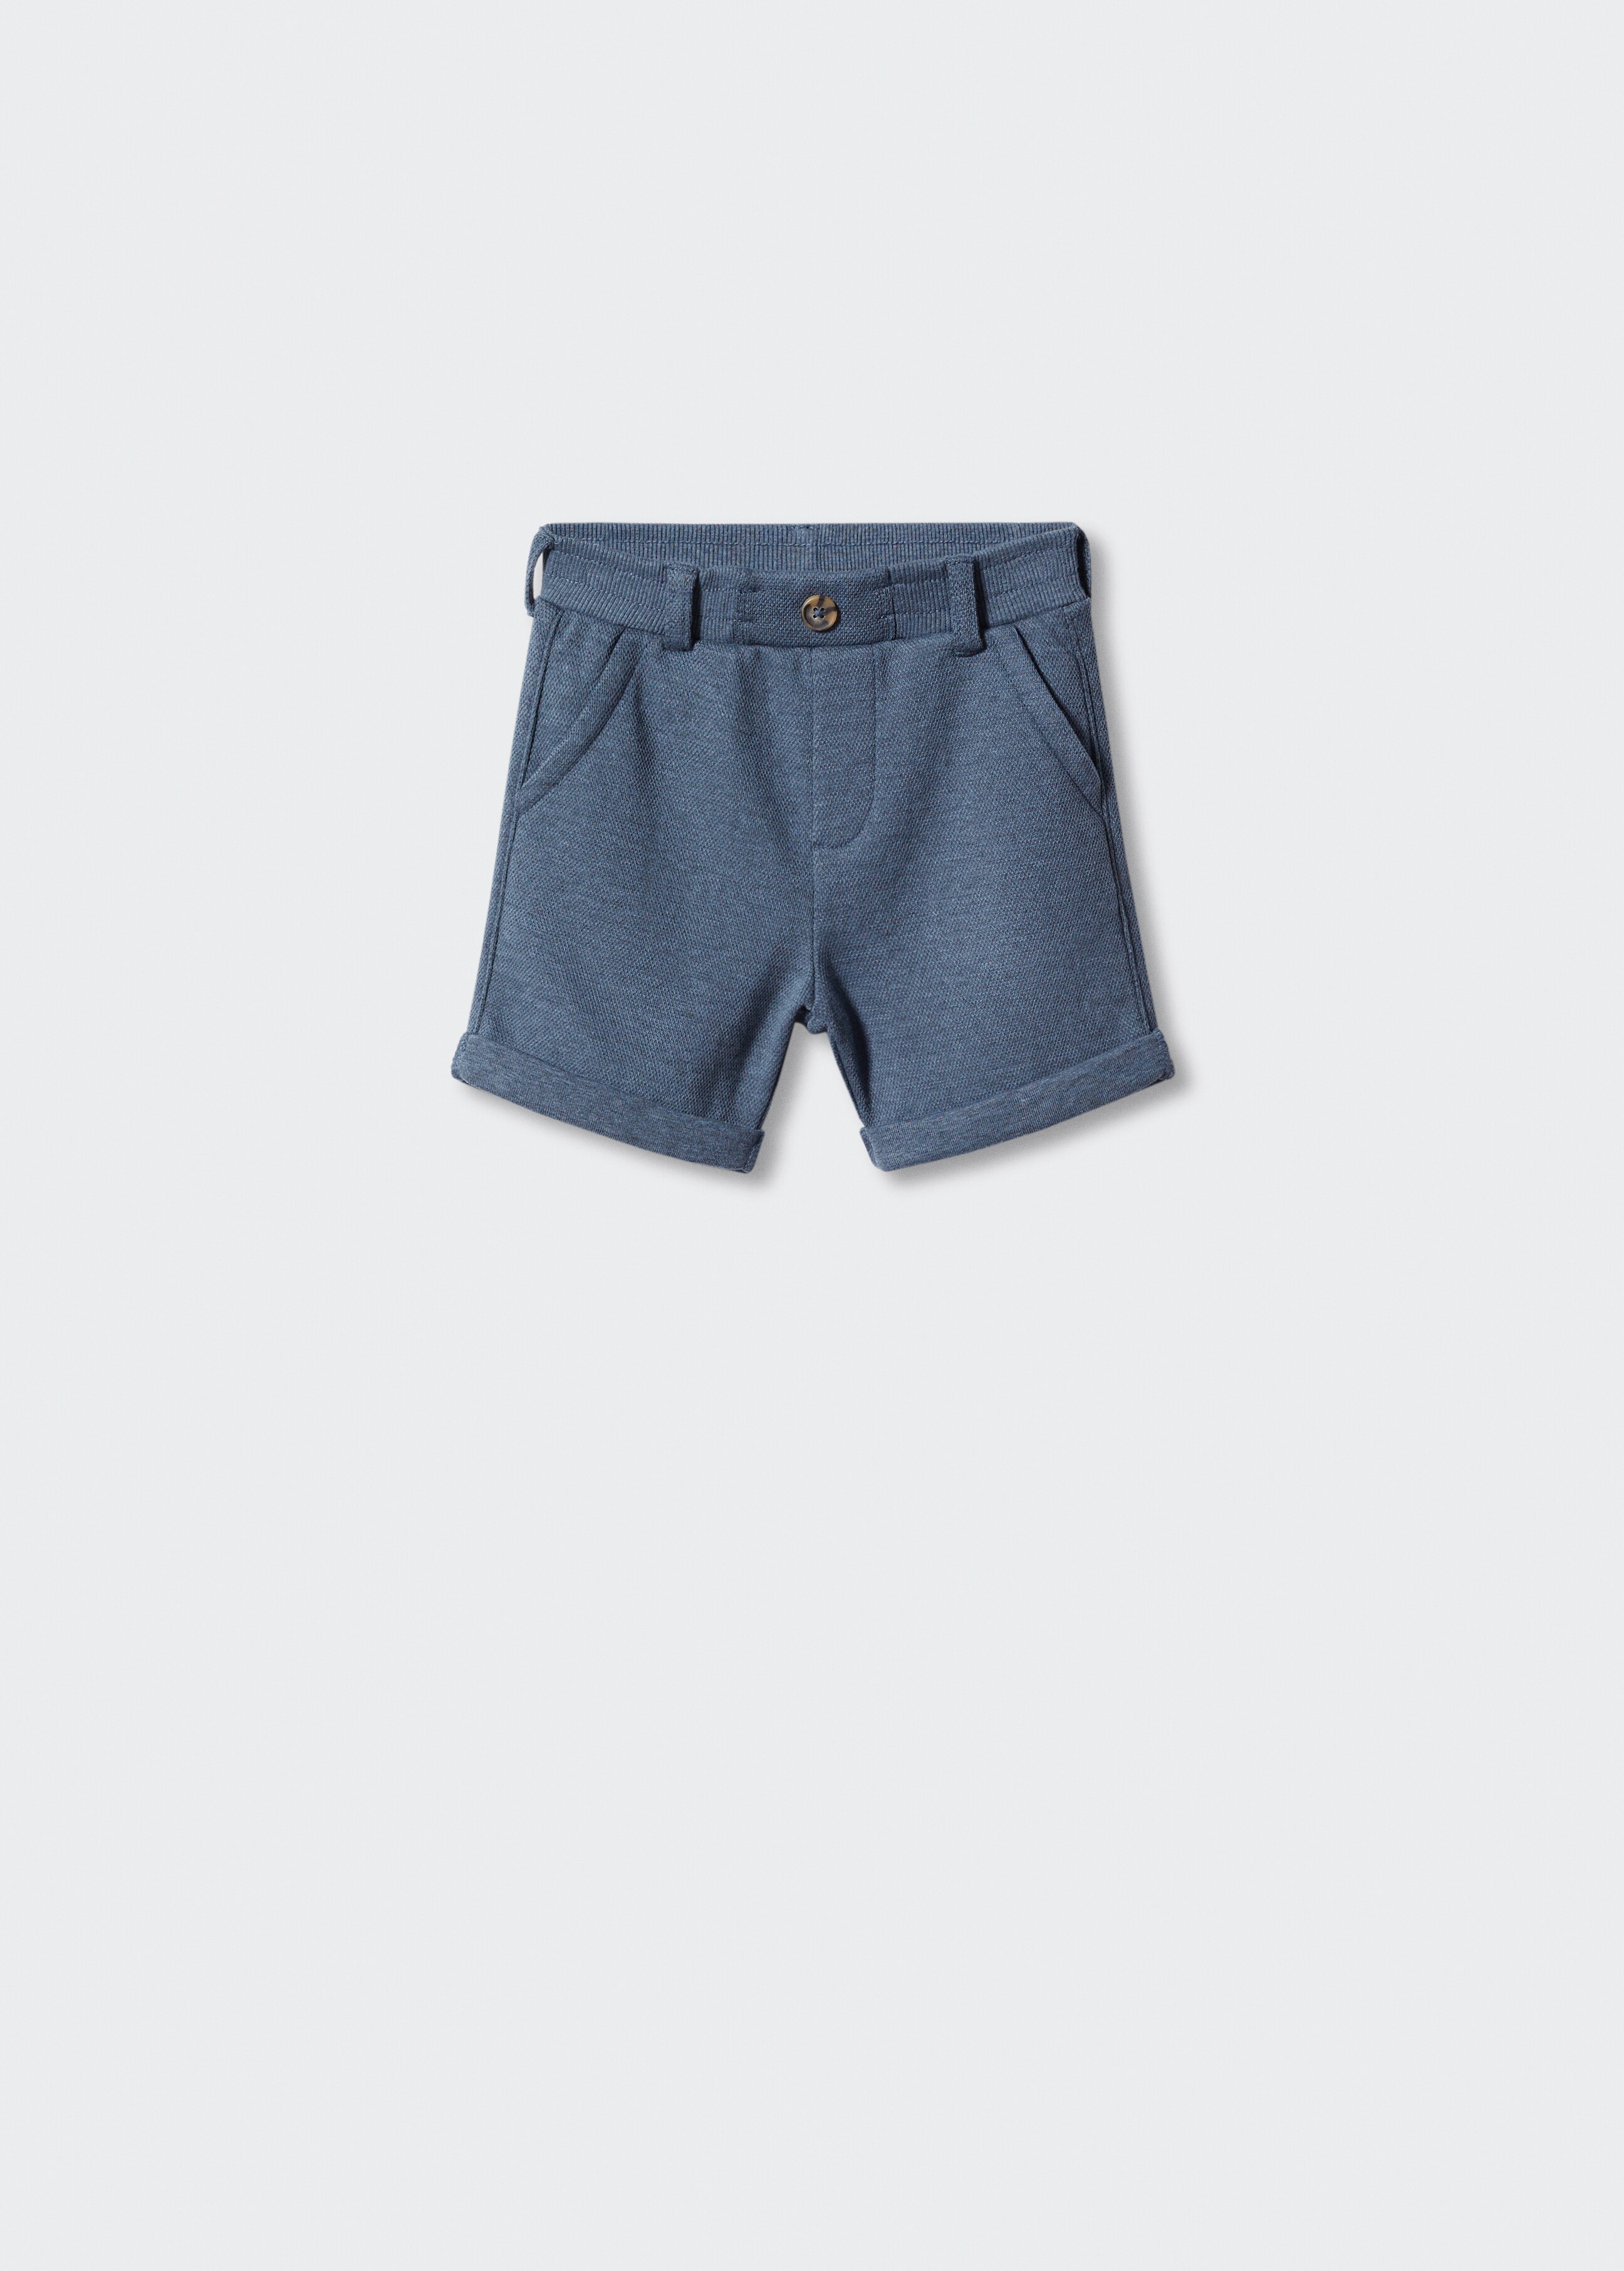 Cotton Bermuda shorts - Article without model